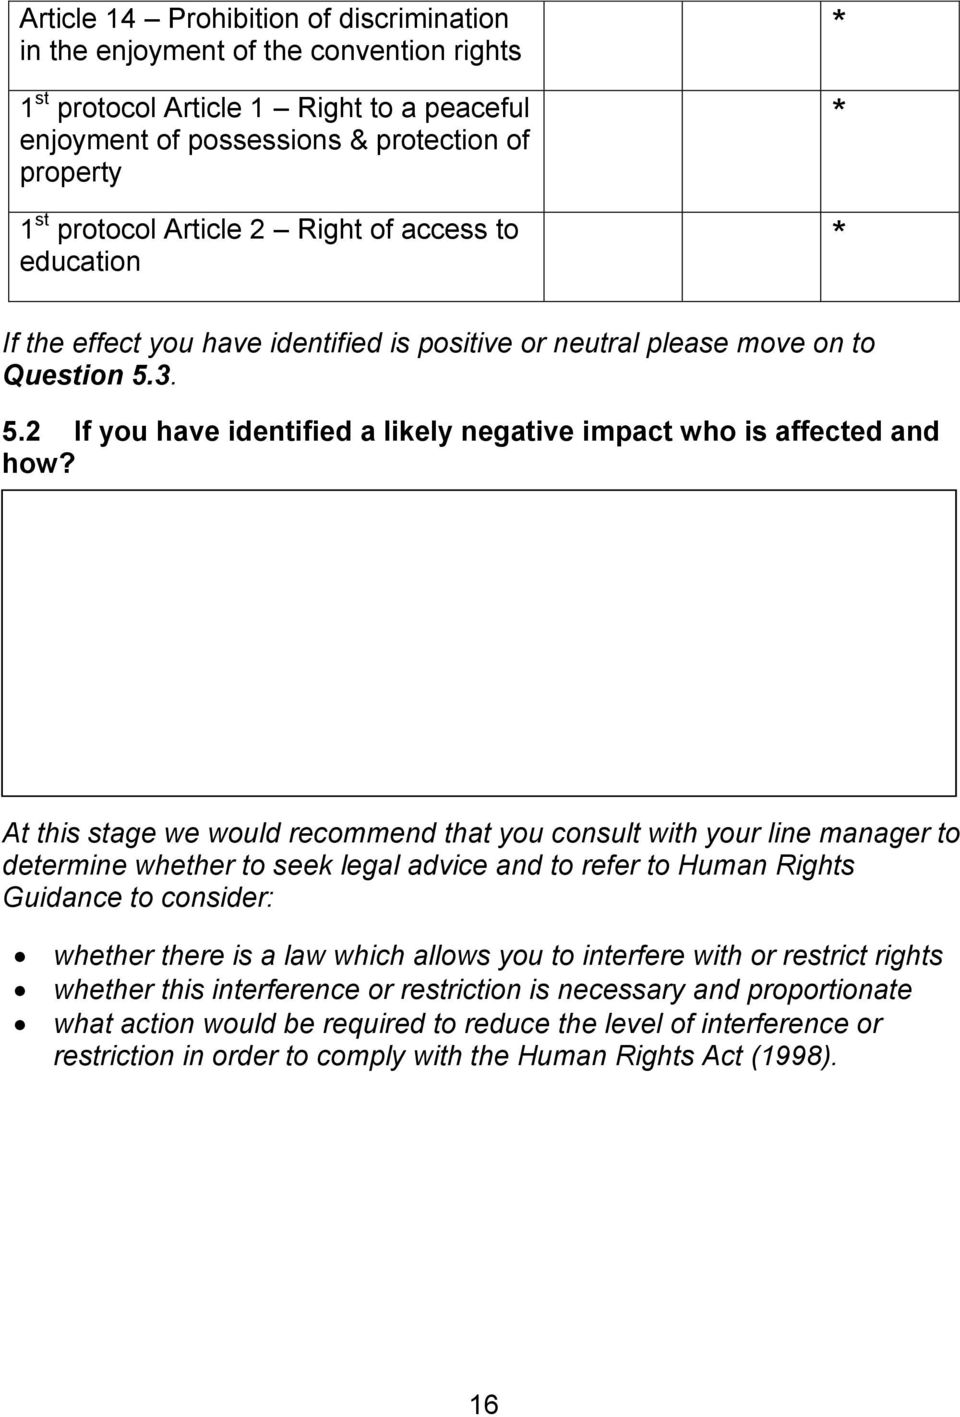 At this stage we would recommend that you consult with your line manager to determine whether to seek legal advice and to refer to Human Rights Guidance to consider: whether there is a law which